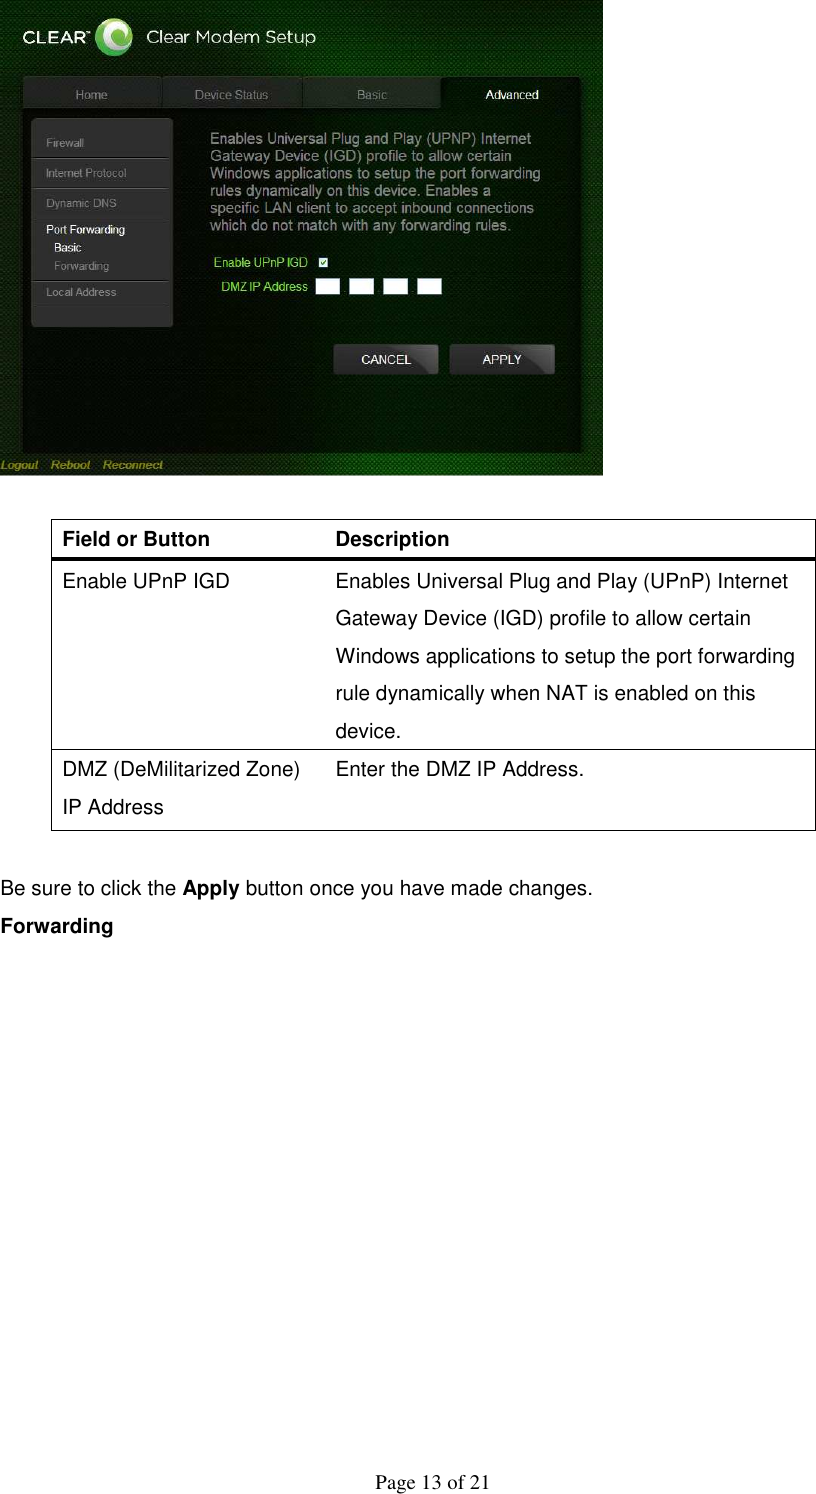  Page 13 of 21   Field or Button   Description   Enable UPnP IGD    Enables Universal Plug and Play (UPnP) Internet Gateway Device (IGD) profile to allow certain Windows applications to setup the port forwarding rule dynamically when NAT is enabled on this device.   DMZ (DeMilitarized Zone) IP Address   Enter the DMZ IP Address.    Be sure to click the Apply button once you have made changes. Forwarding  